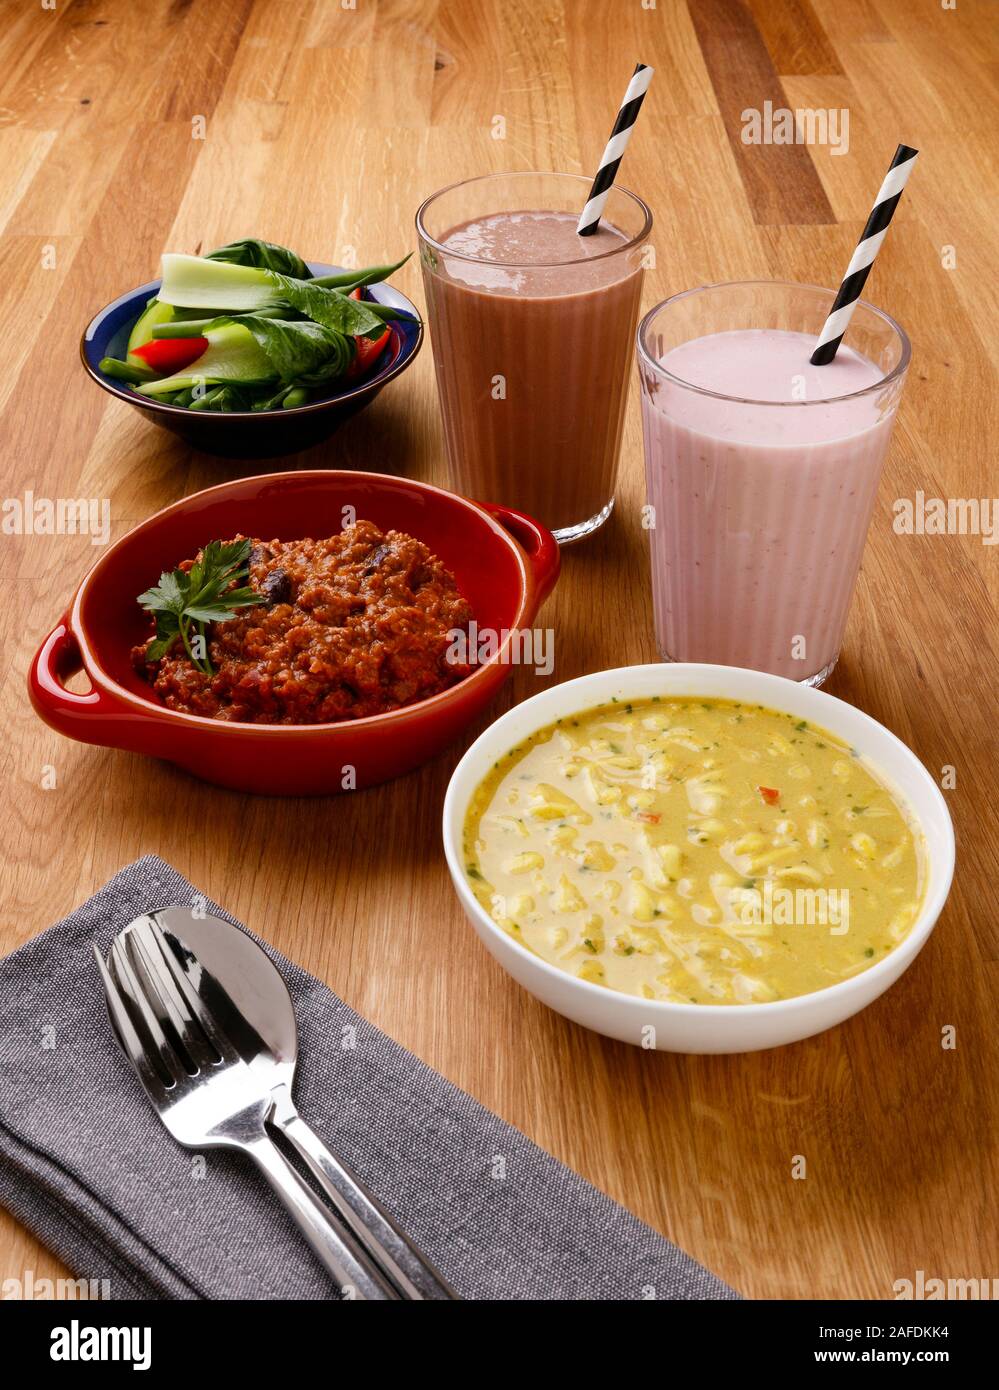 Calorie controlled daily meal plan, including breakfast, lunch and evening meal, with milkshake, shot on a wooden background Stock Photo